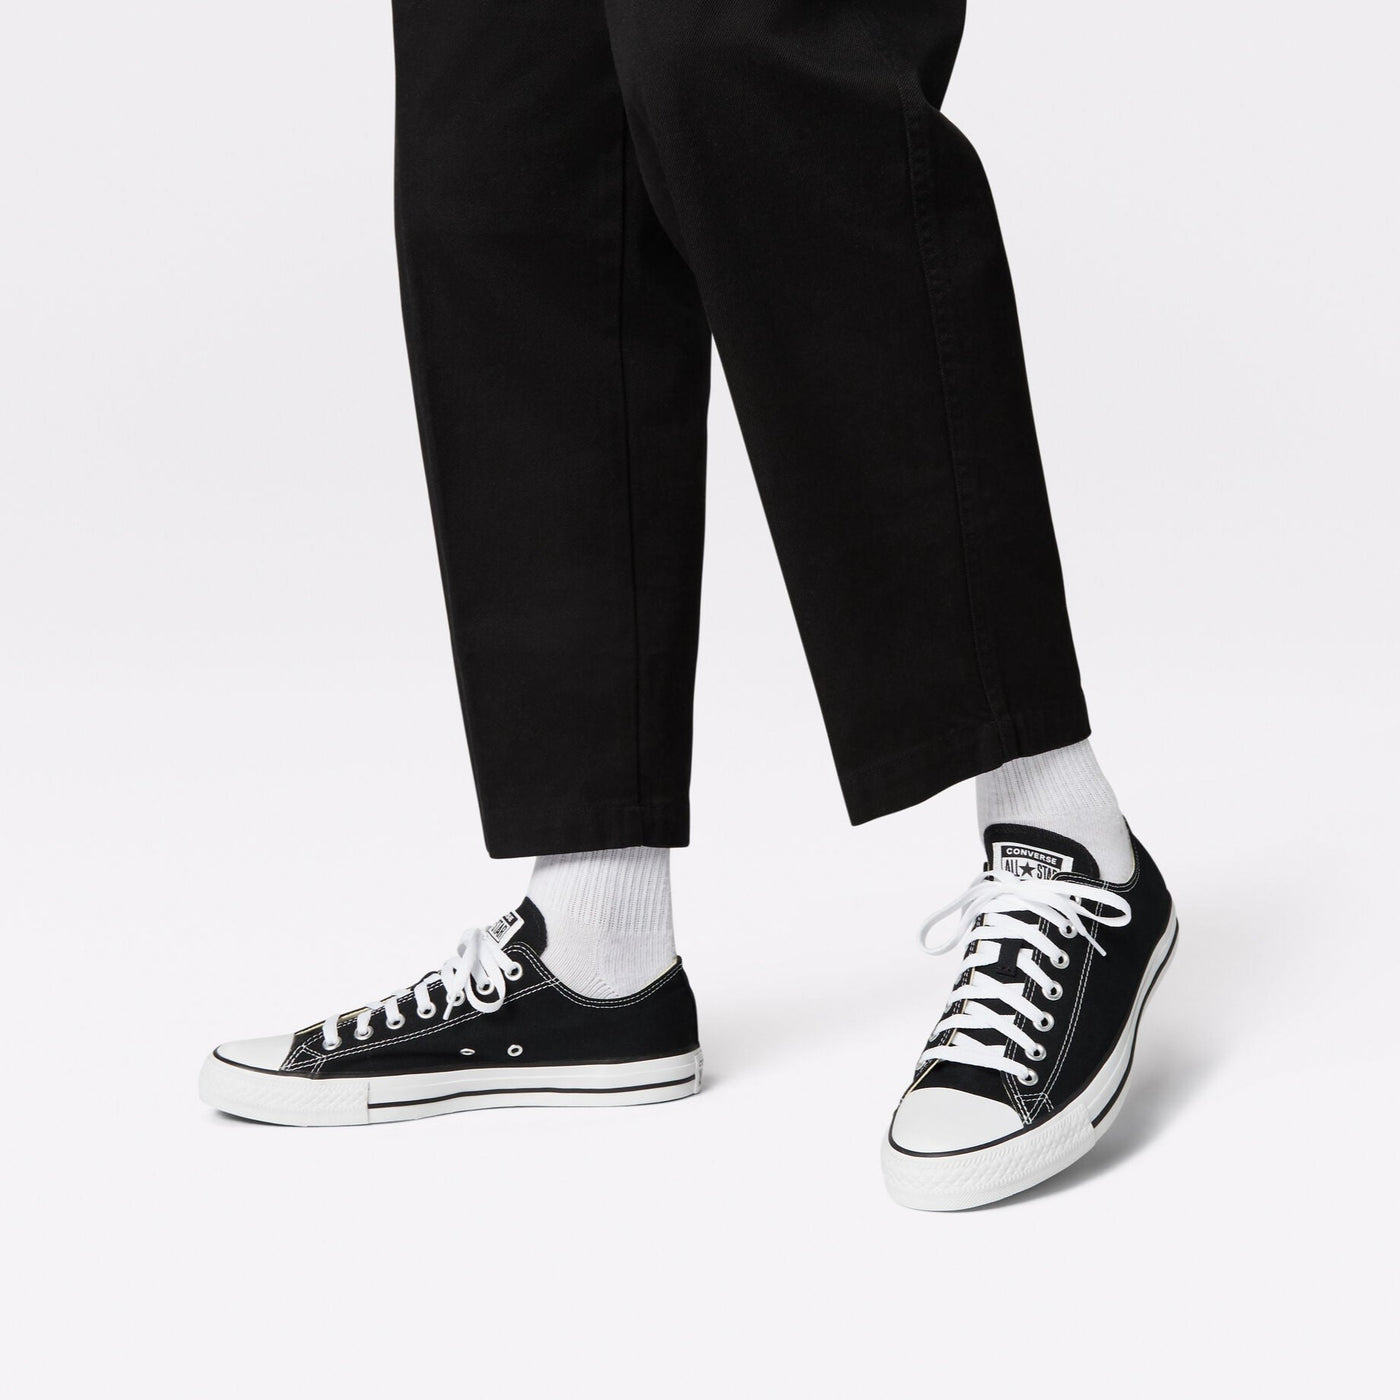 Converse Chuck Taylor All Star Classic Low Top Black